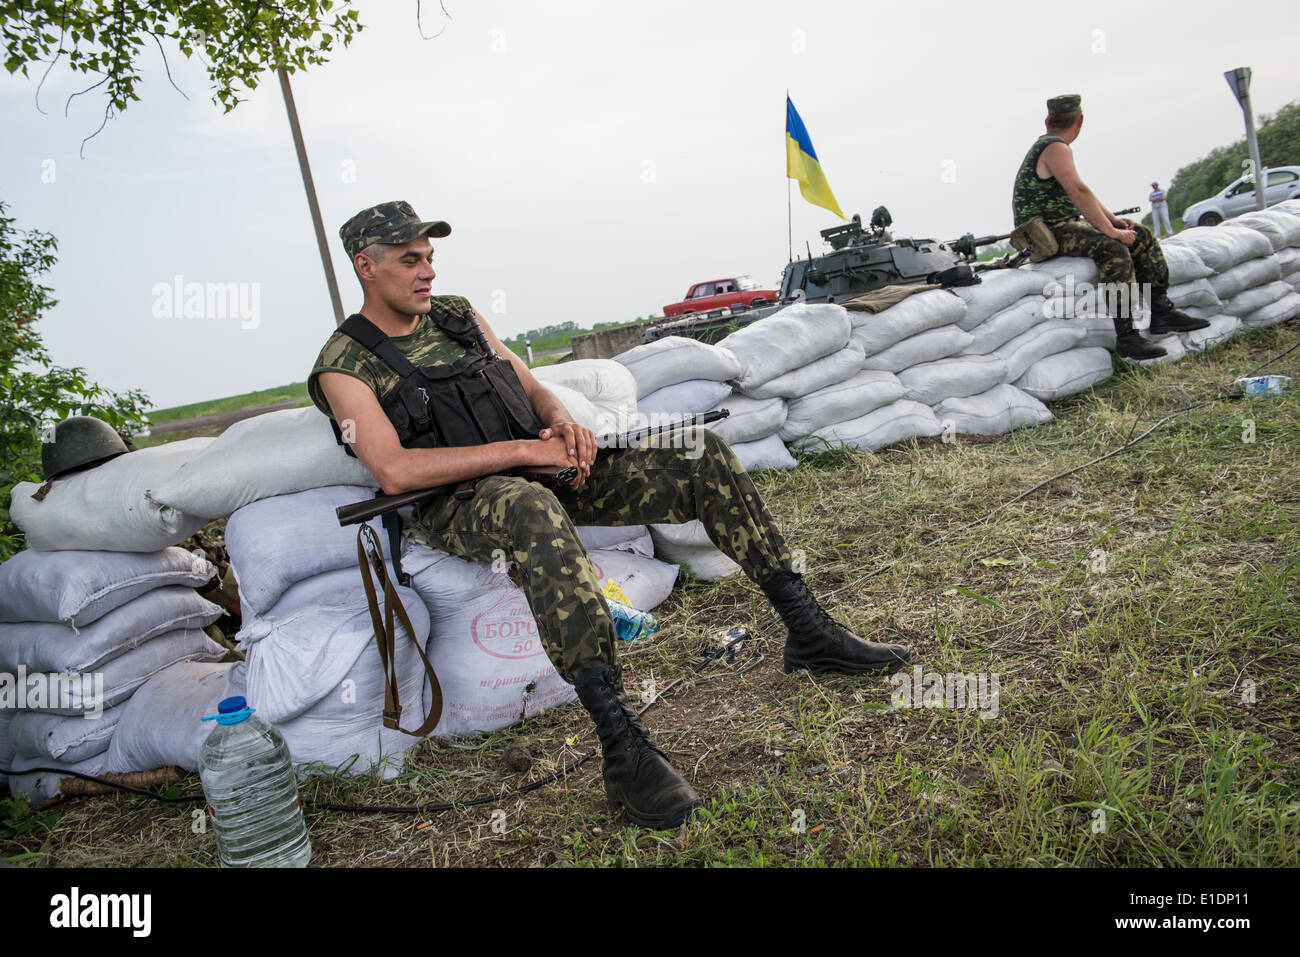 Ukrainian soldier on a check point near Dobropillia in Donetsk Oblast on 19 May during 2014 pro-Russian conflict in Ukraine Stock Photo